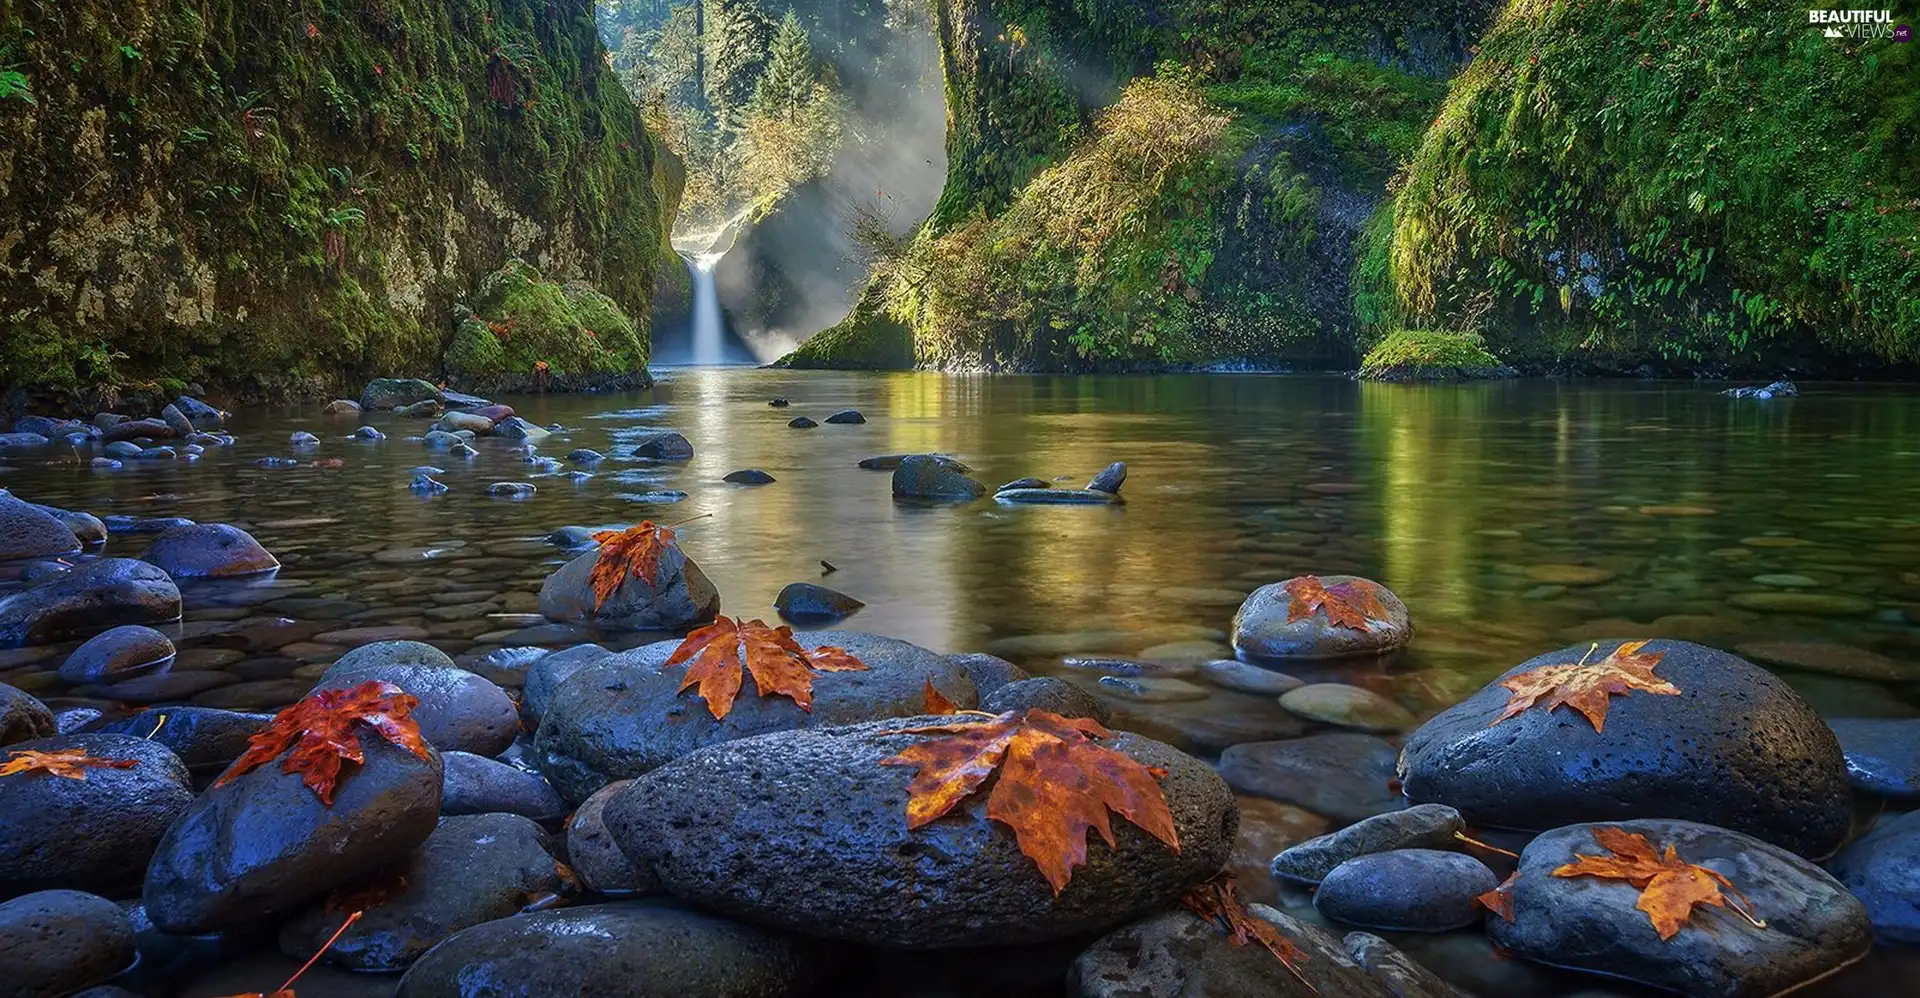 Leaf, waterfall, forest, Stones, River, rocks, autumn